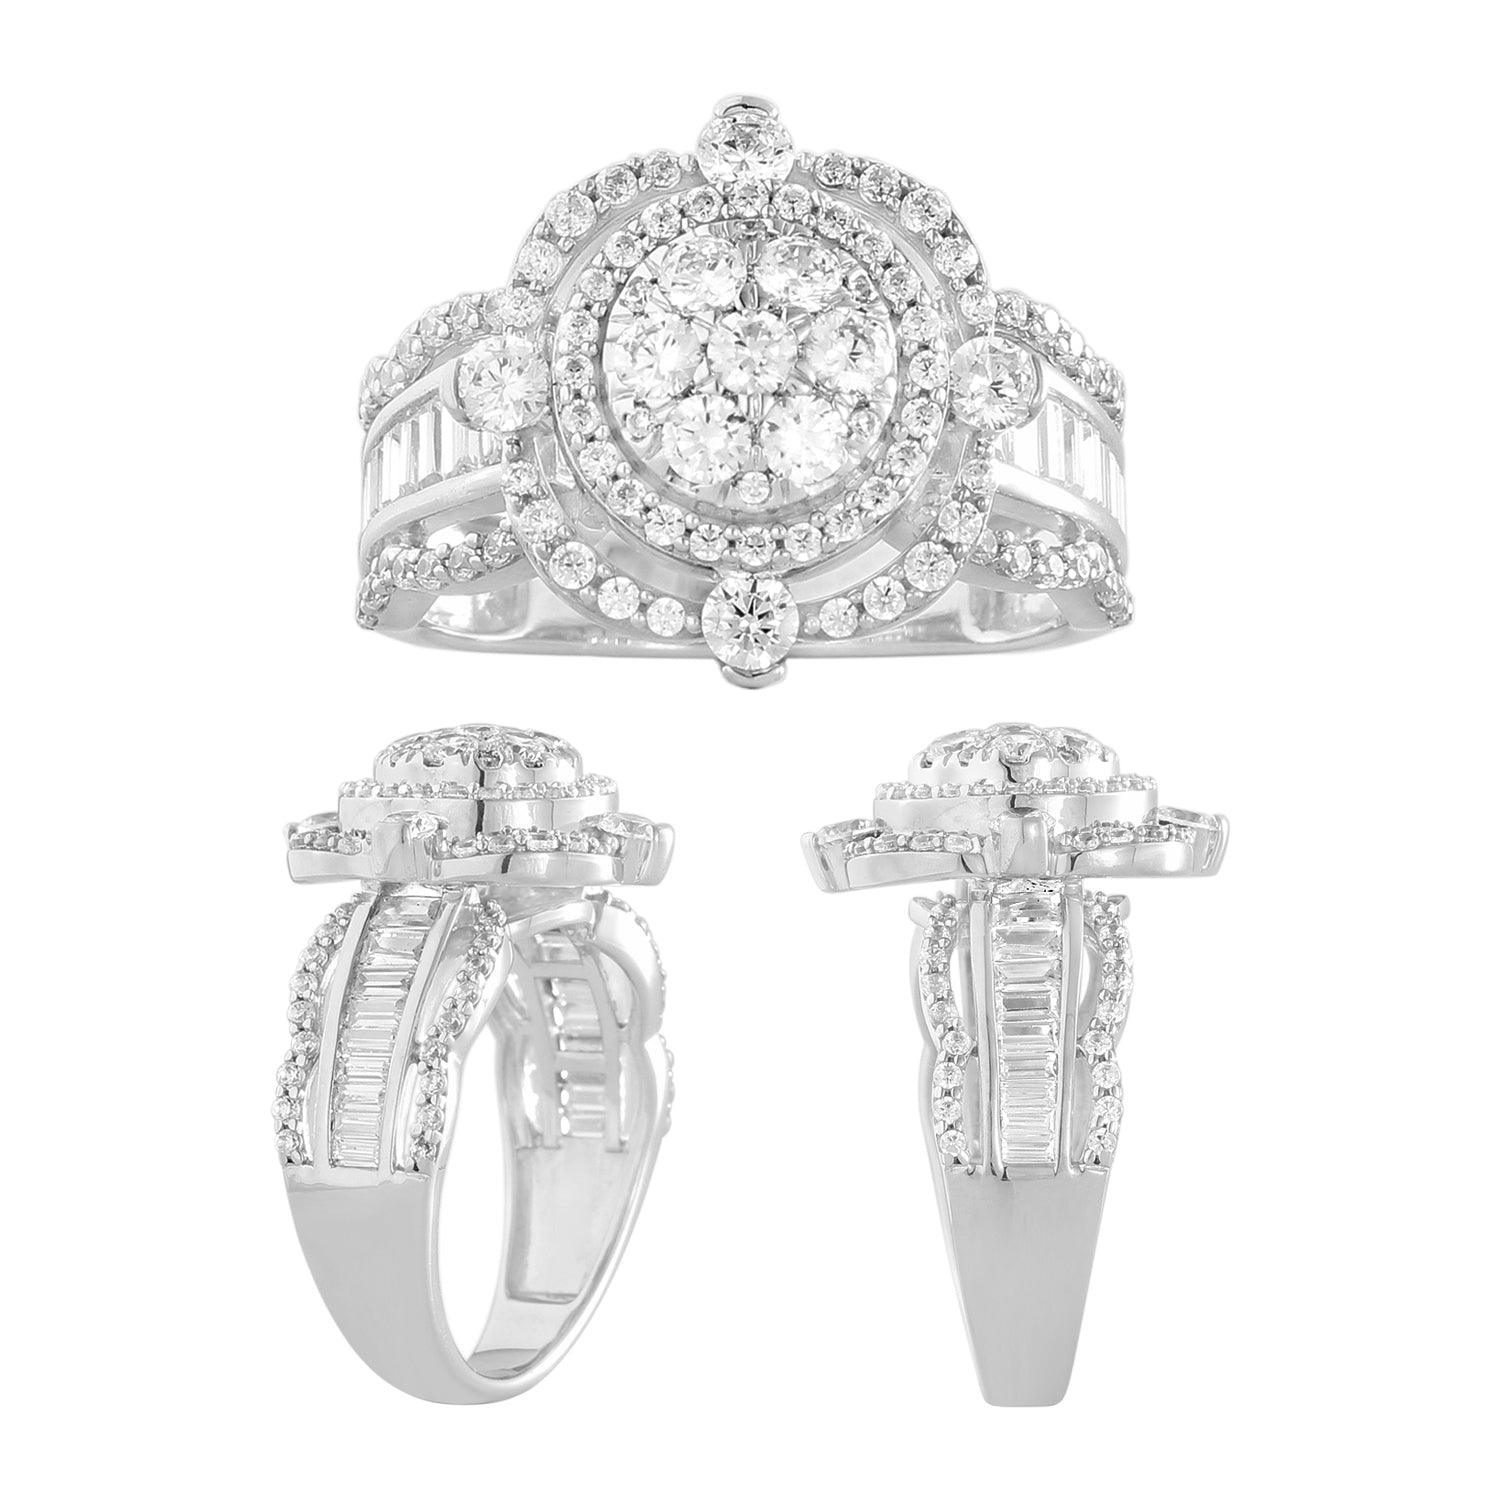 Round Engagement Ring with 1.47 Carat TW of Diamonds in 14K White Gold